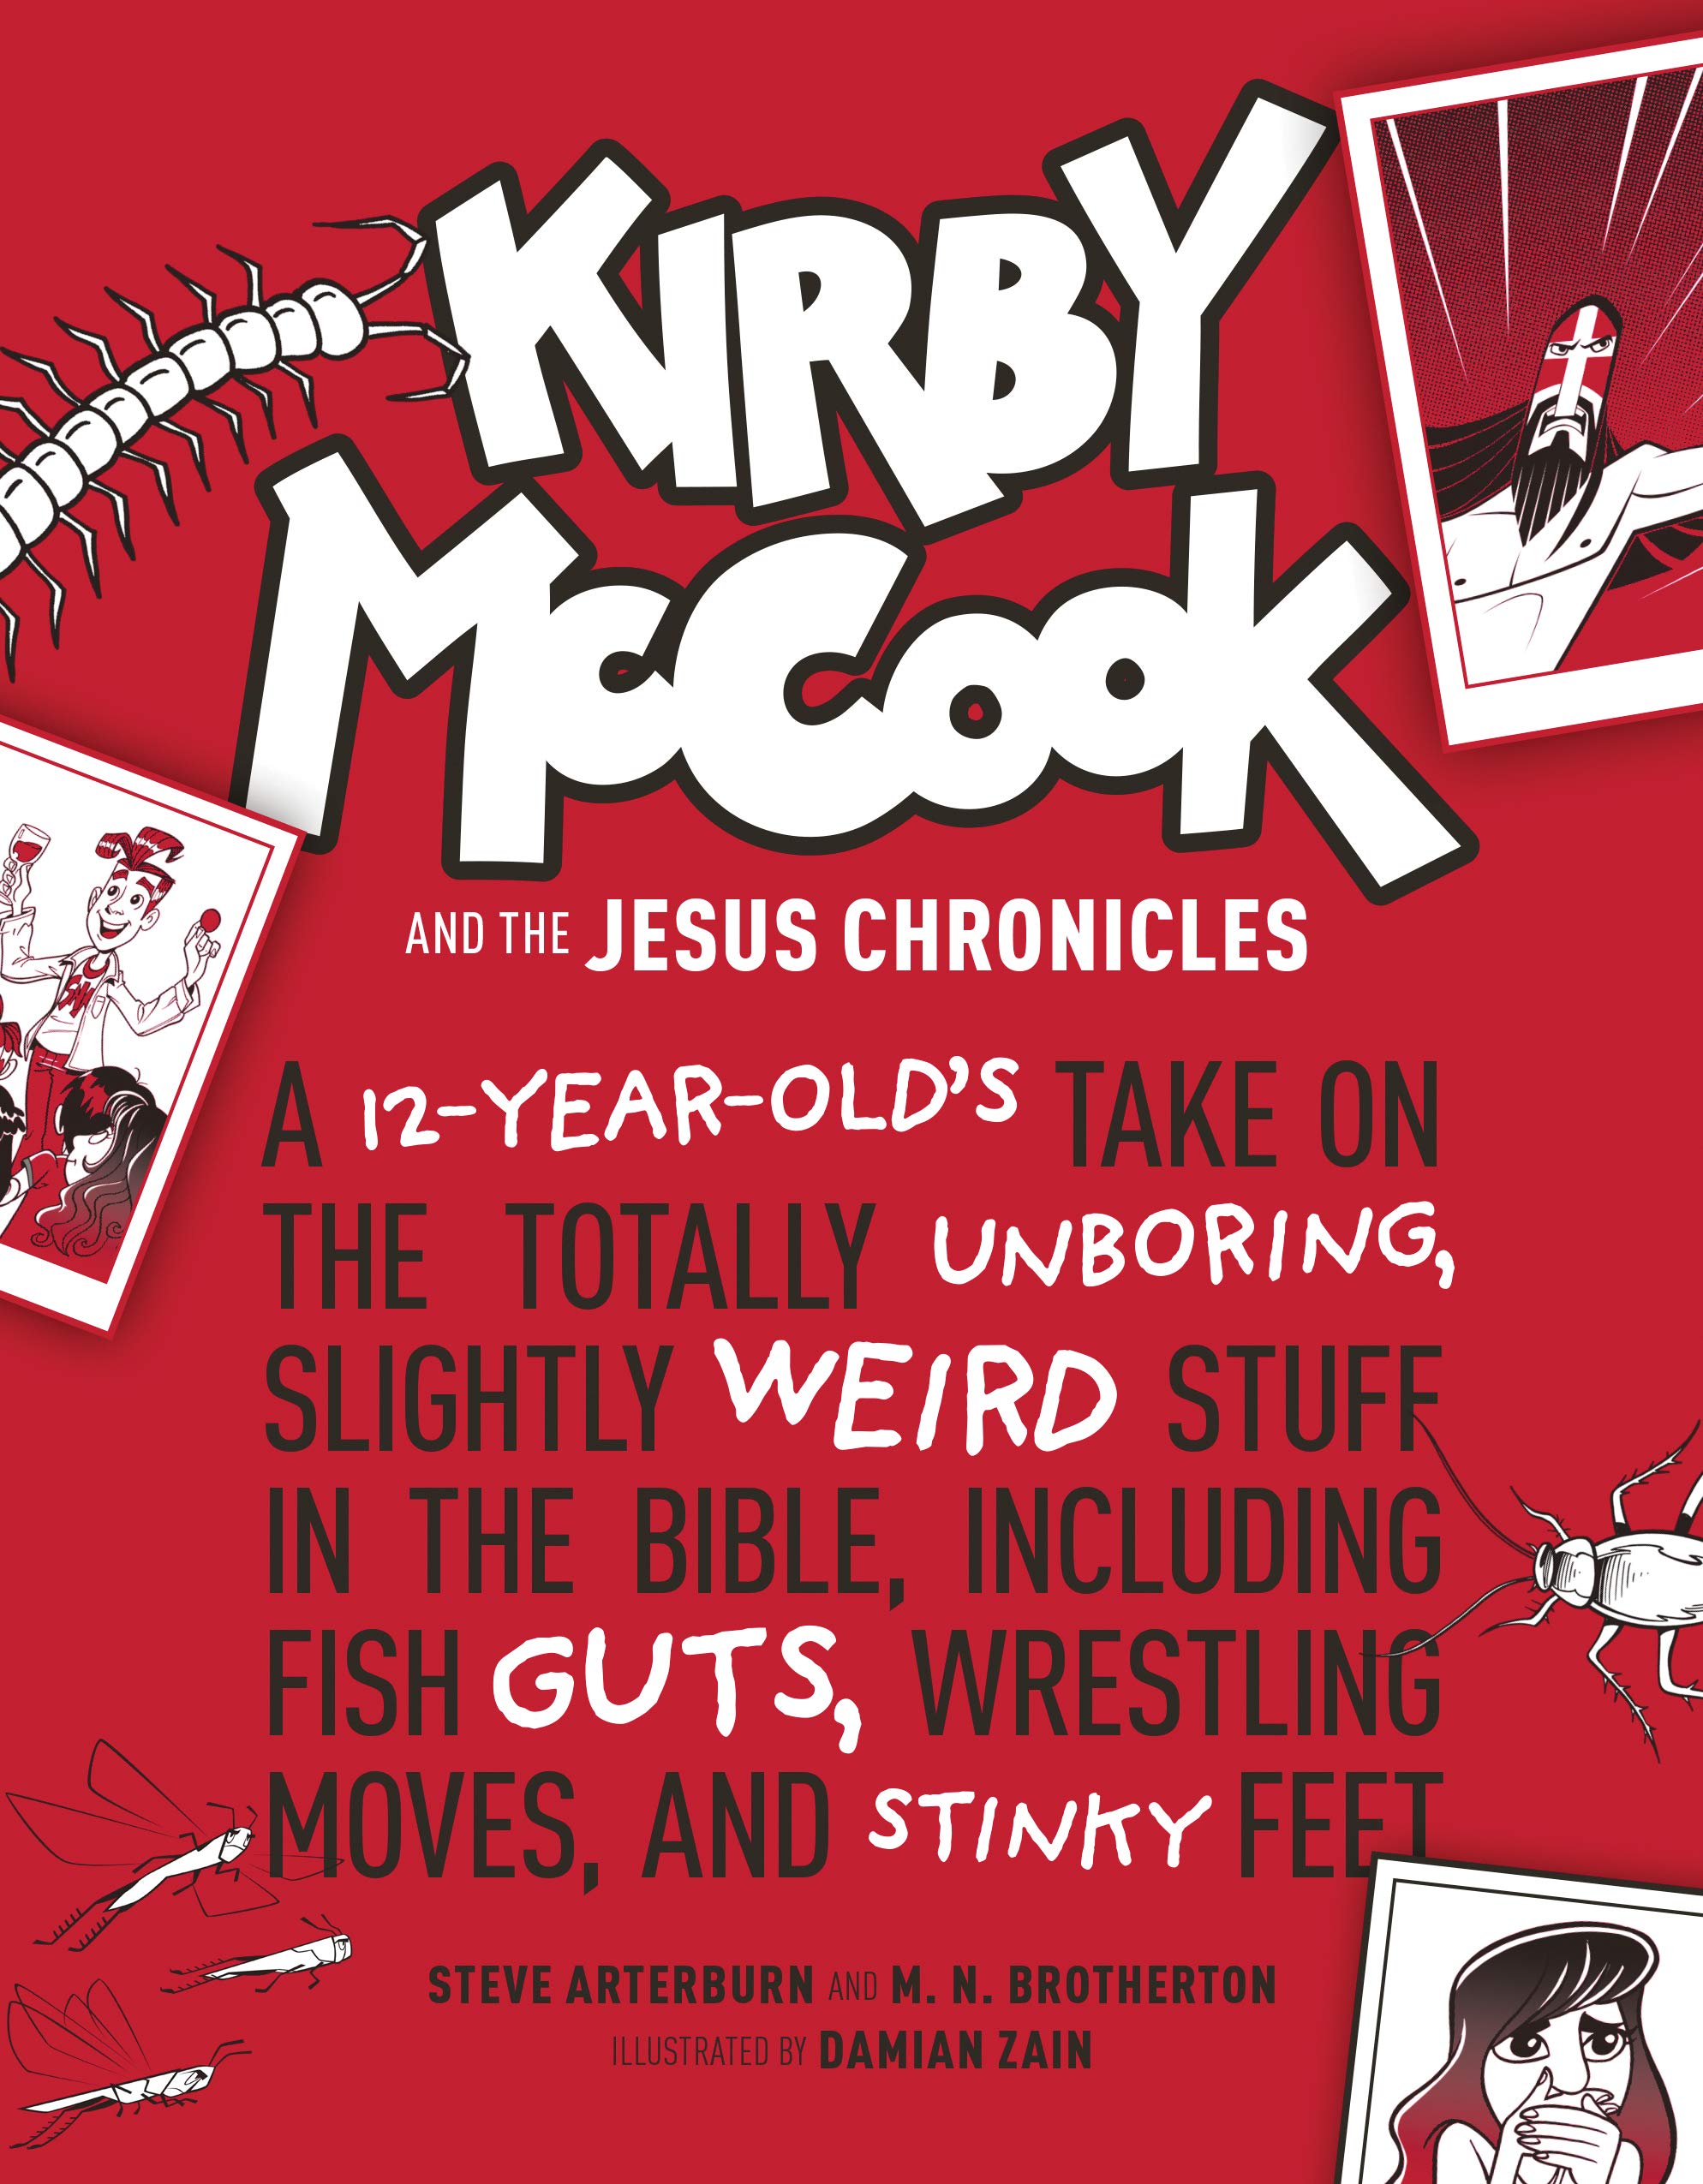 Kirby McCook and the Jesus Chronicles: A 12-Year-Old's Take on the Totally Unboring, Slightly Weird Stuff in the Bible, Including Fish Guts, Wrestling Moves, and Stinky Feet